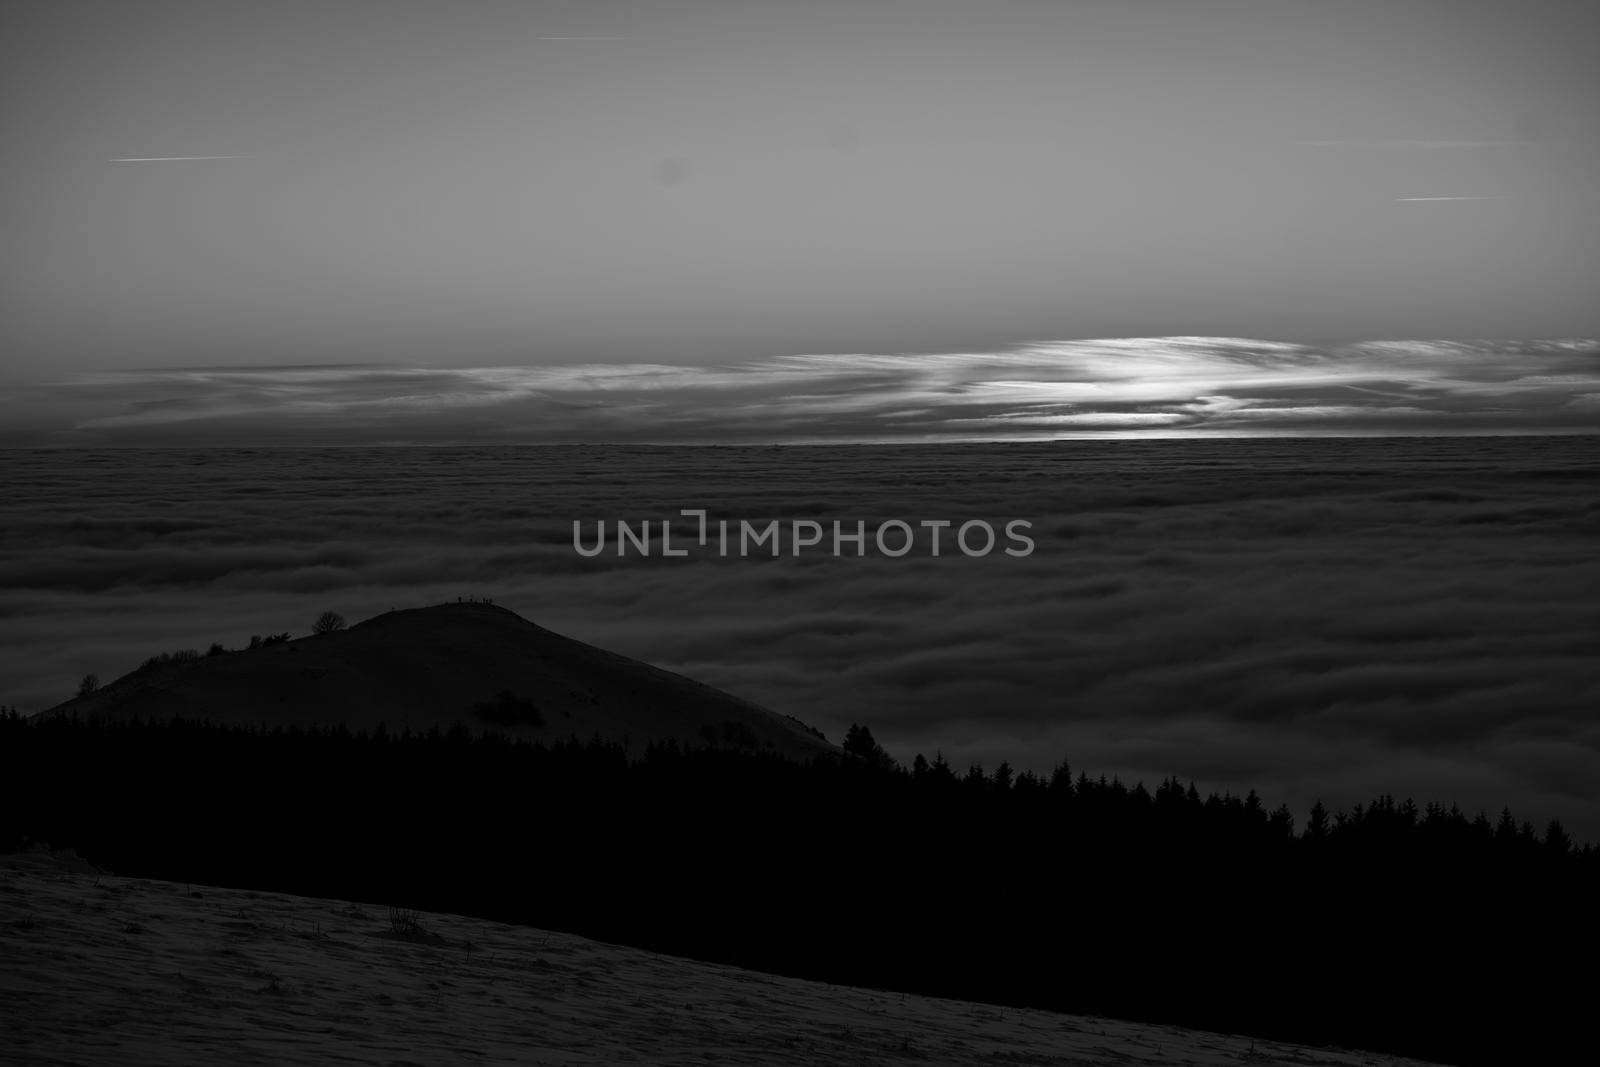 the romance of tourism and recreation, as well as the principles of a healthy lifestyle, is to watch the fantastic play of the sun's rays setting over the horizon on the highest Wasserkuppe mountain in Hesse, Germany and breathe fresh clean mountain air black and white photo High quality photo